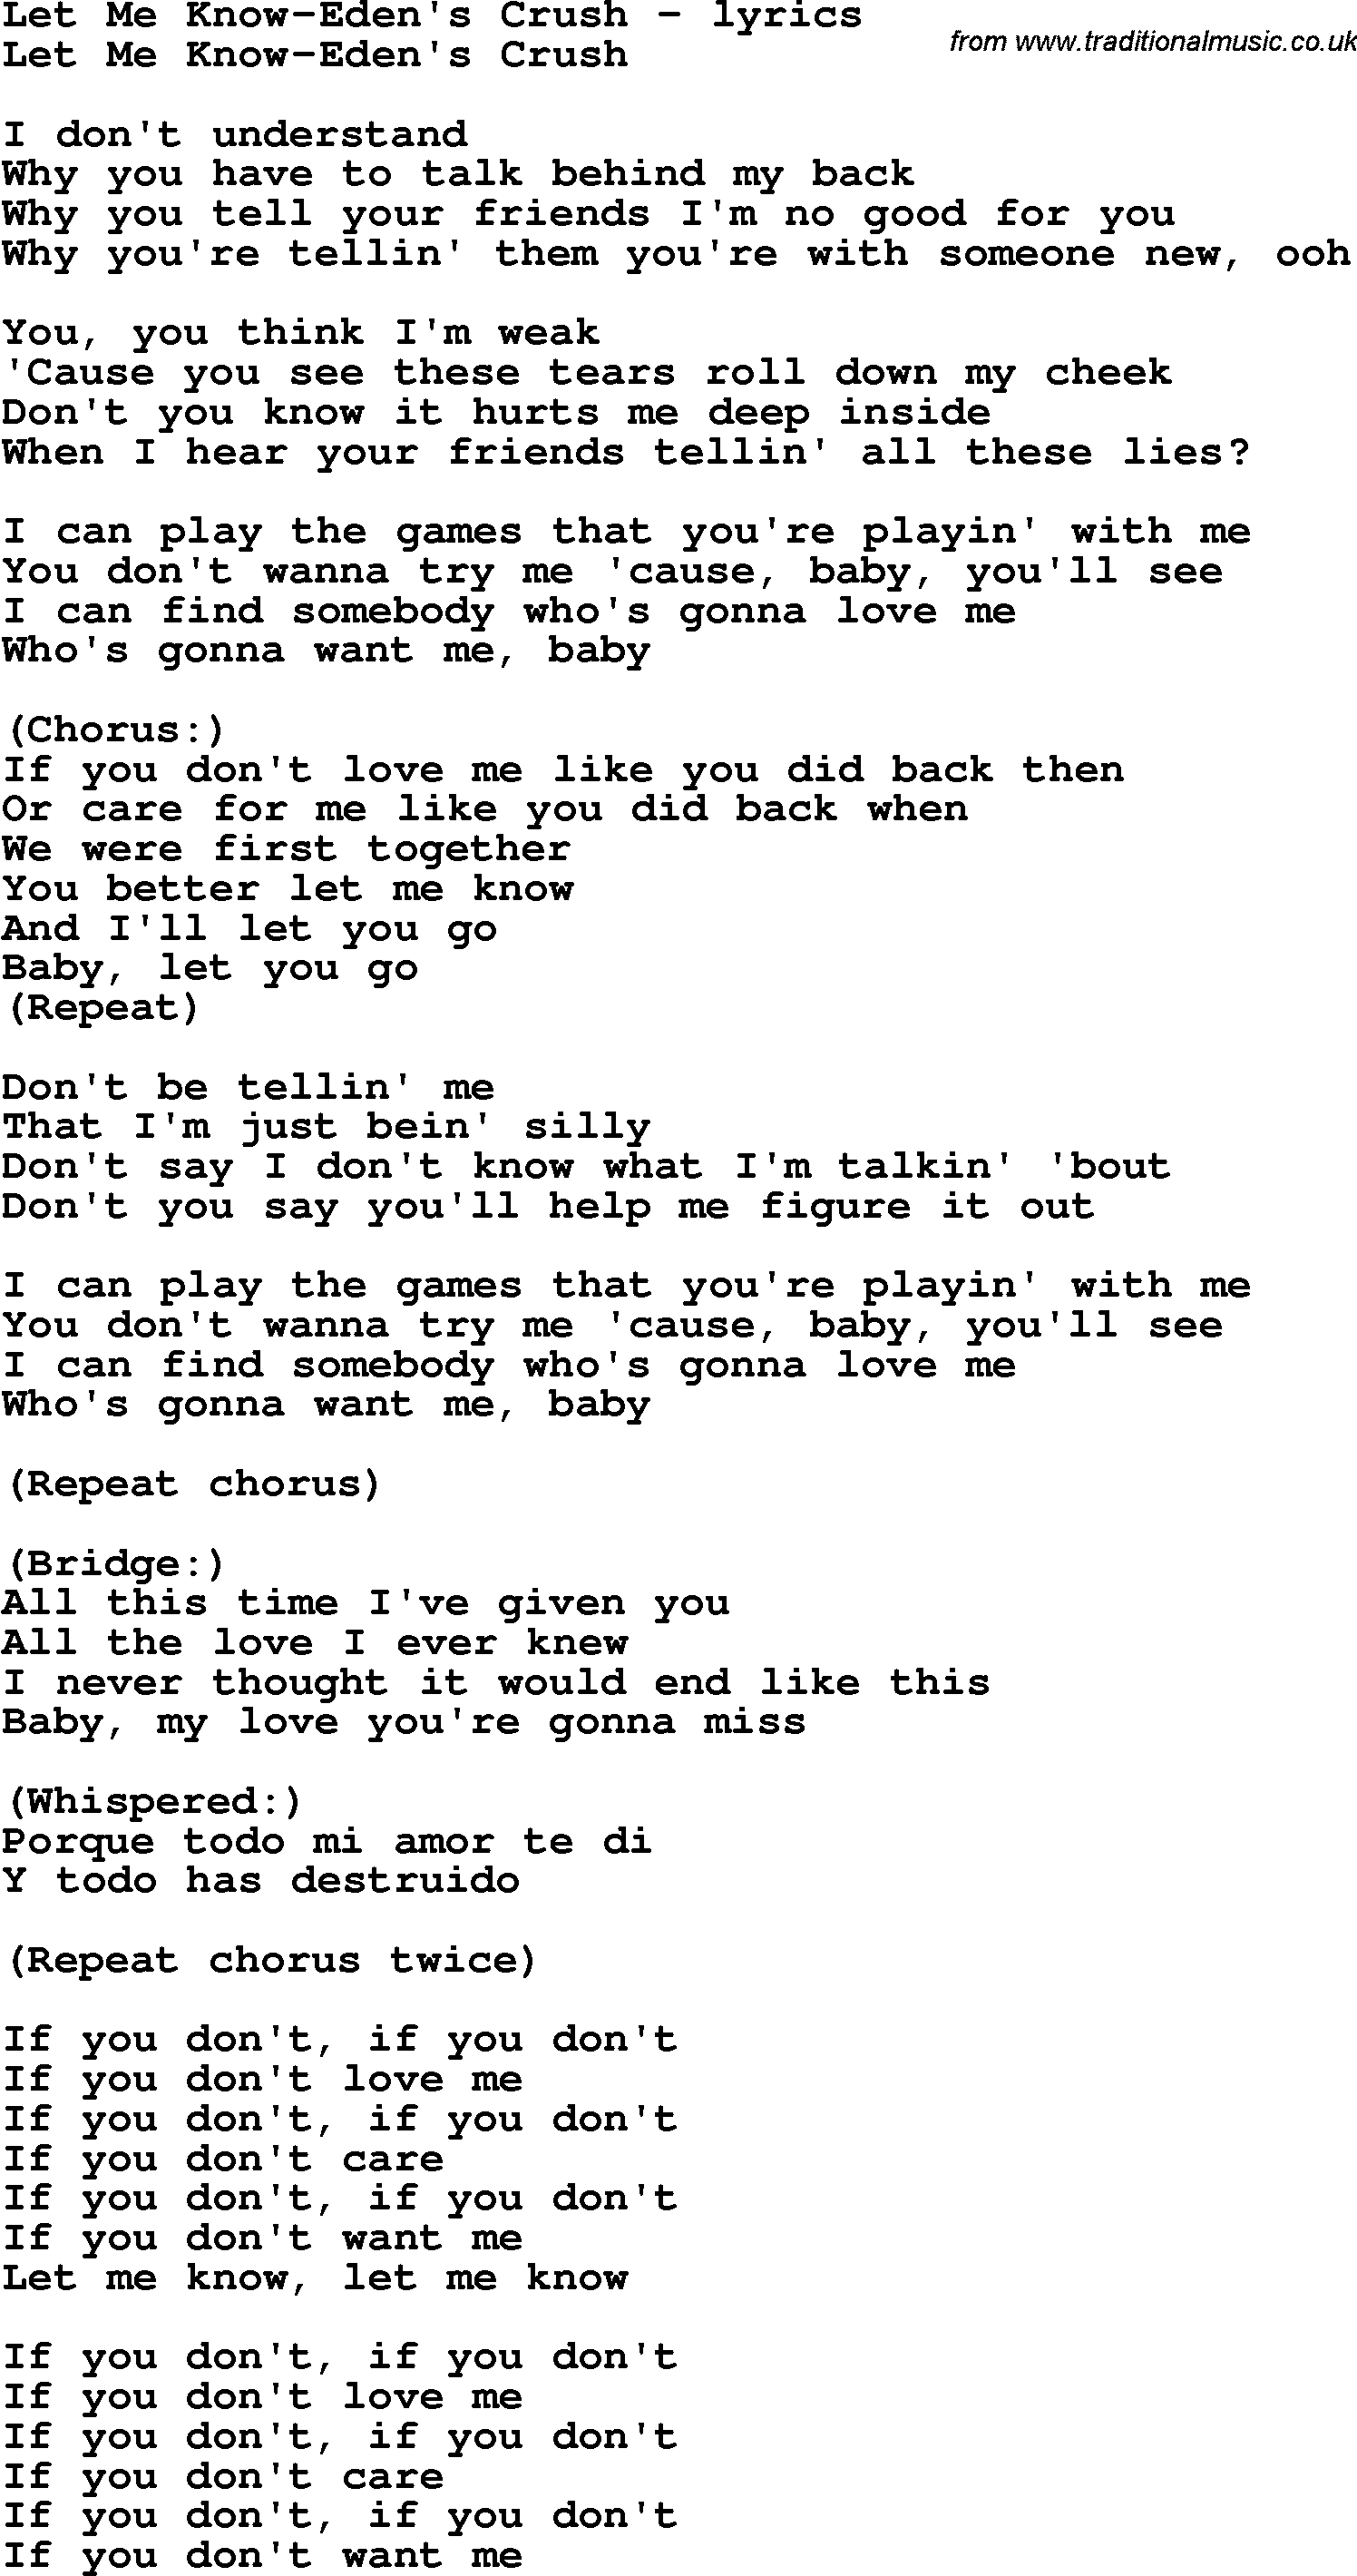 Love Song Lyrics for: Let Me Know-Eden's Crush